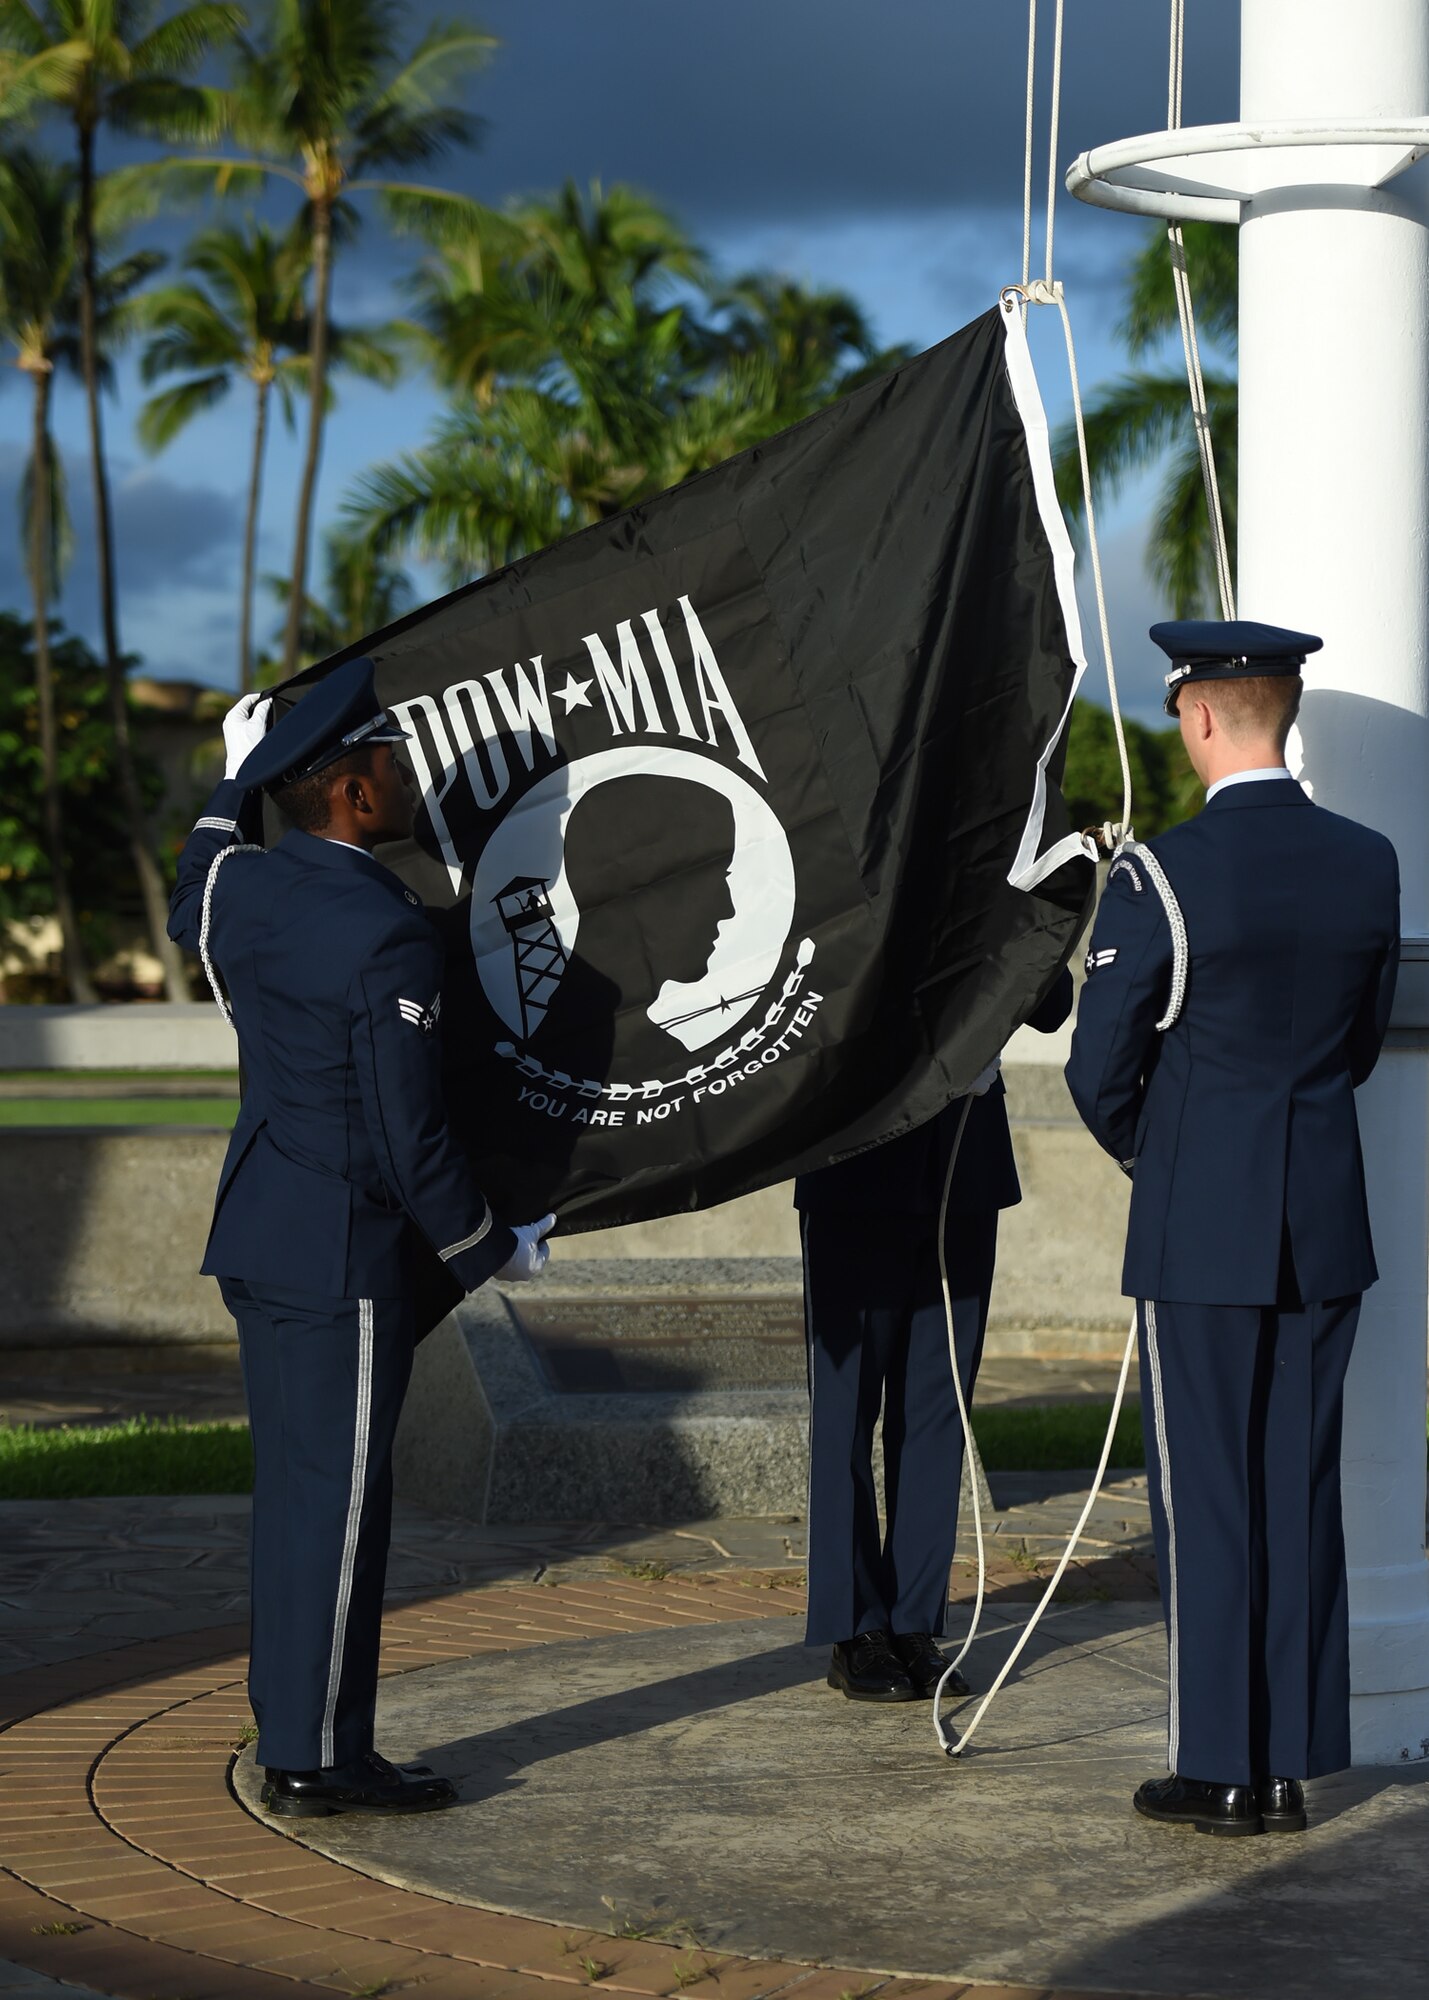 Airmen From Joint Base Pearl Harbor-Hickam’s Honor Guard raise the POW/MIA flag during a POW/MIA revile ceremony, held on JBPHH, Hawaii, Sept. 14, 2015. The ceremony started this year’s POW/MIA week, which honors the 1,627 missing or unaccounted for military members in all branches of armed services. The POW/MIA flag symbolizes the nation’s remembrance of those who were imprisoned while serving in conflicts and those who remain missing. (U.S. Air Force photo by Tech. Sgt. Aaron Oelrich/Released)
